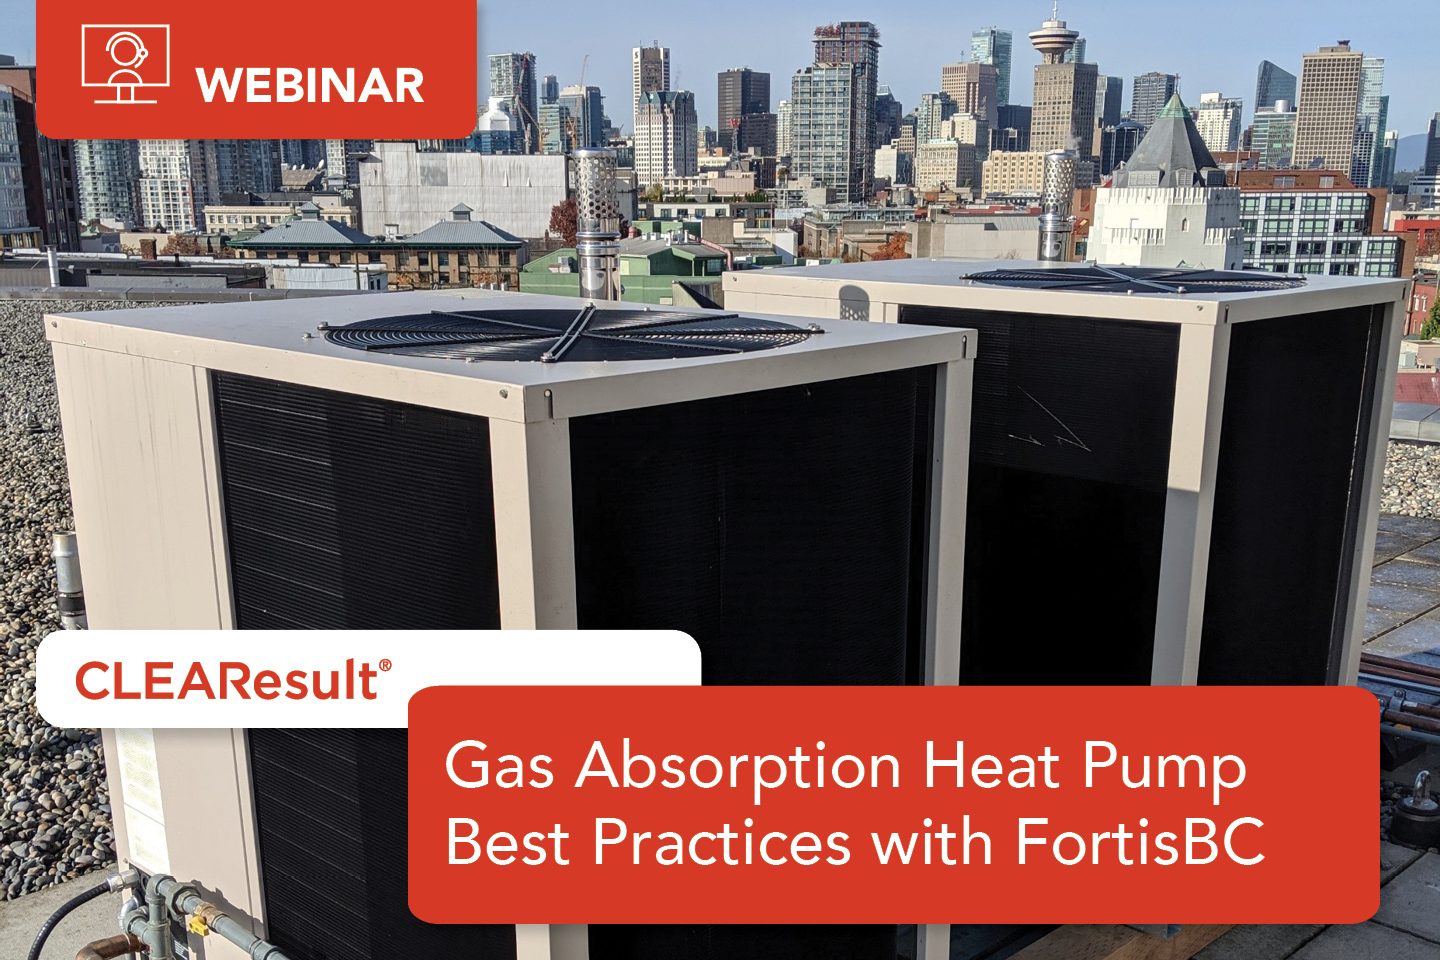 Watch our full webinar, Gas Absorption Heat Pump Best Practices with FortisBC